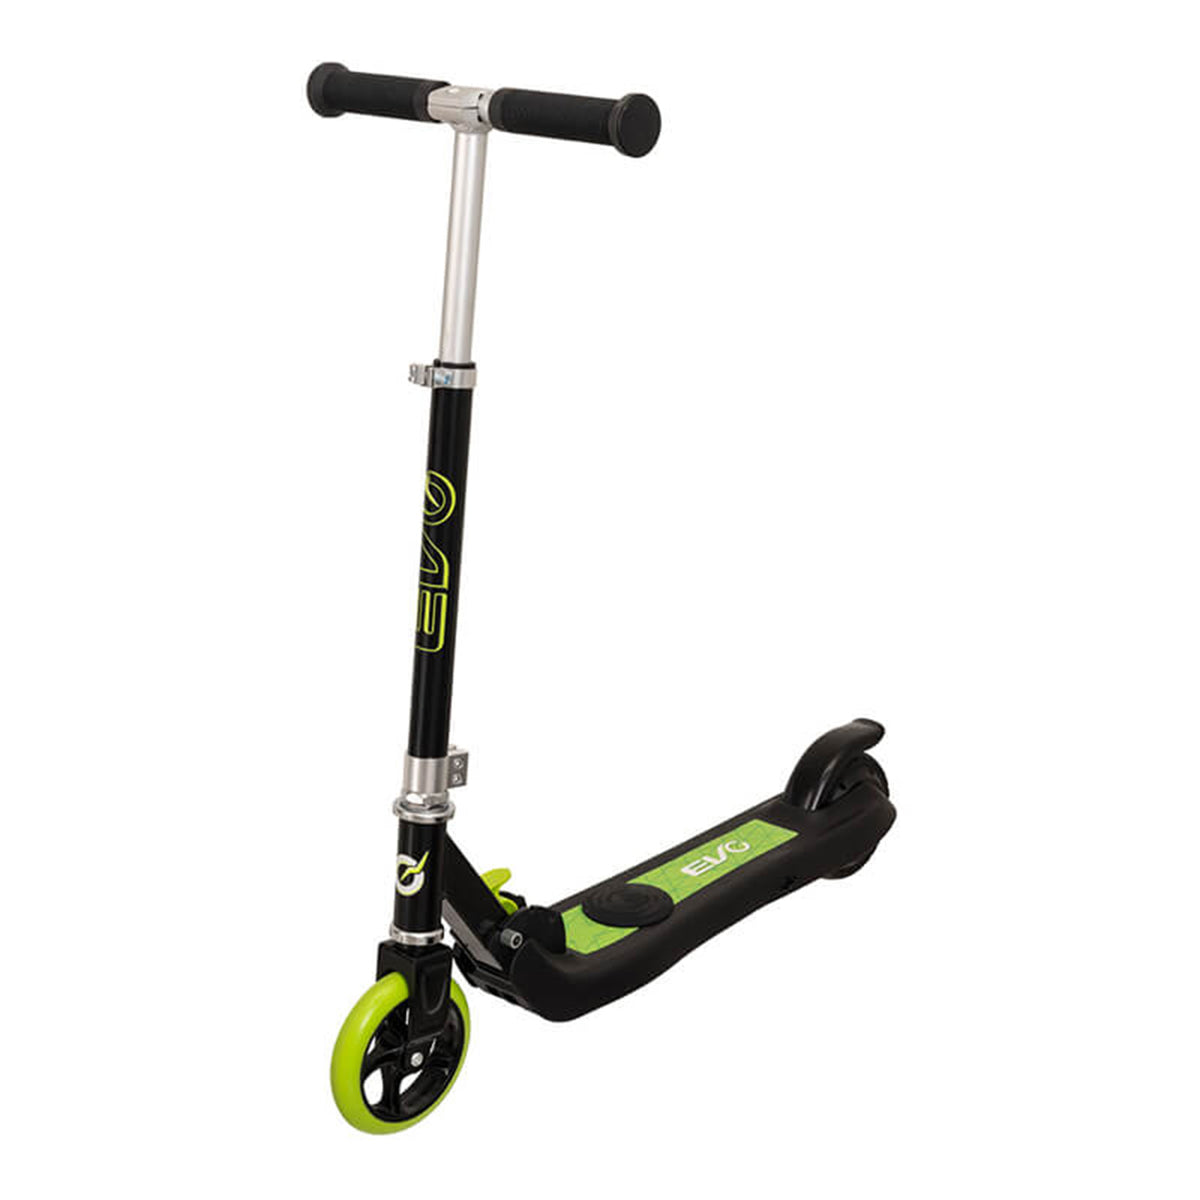 Vt1 Scooter - Lime